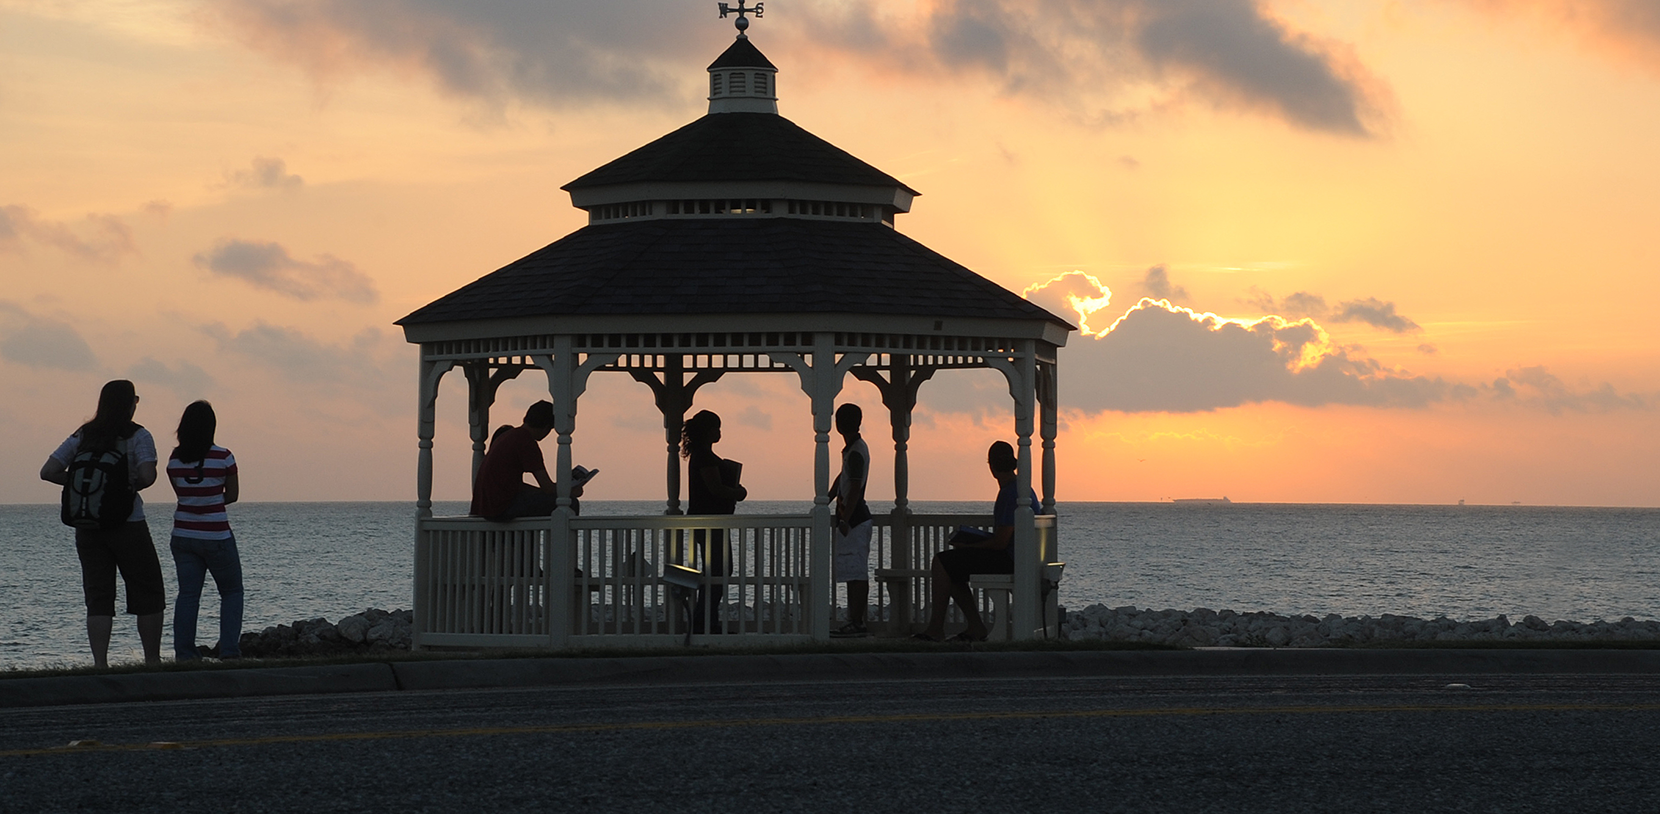 students in a gazebo by the sea at sunset